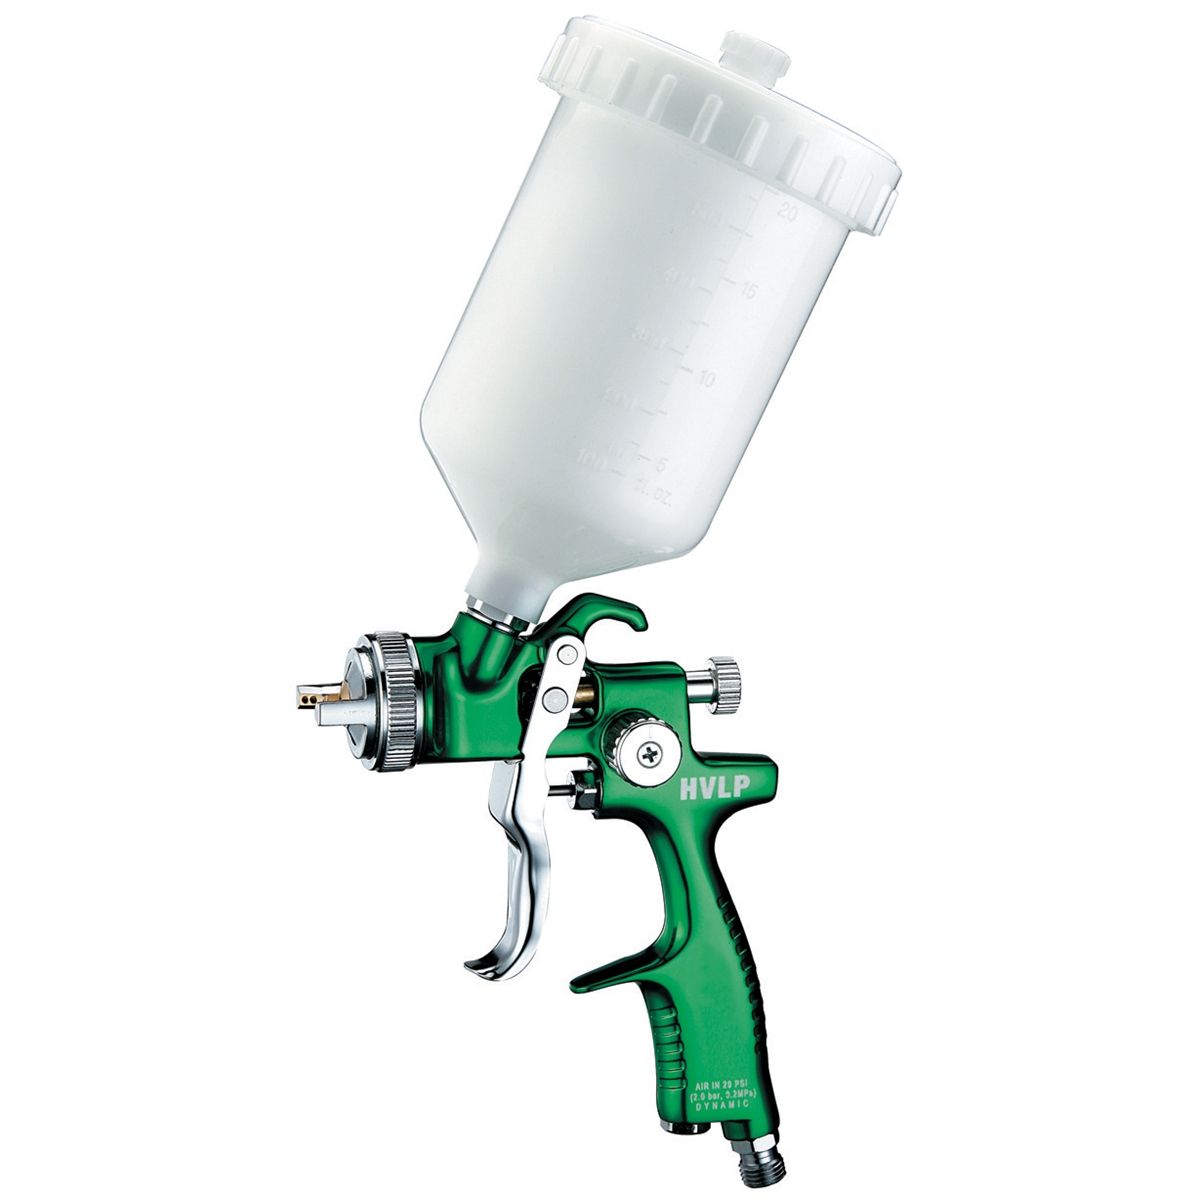 EuroTech Forged HVLP Spray Gun 1.3mm Nozzle & Plastic Cup